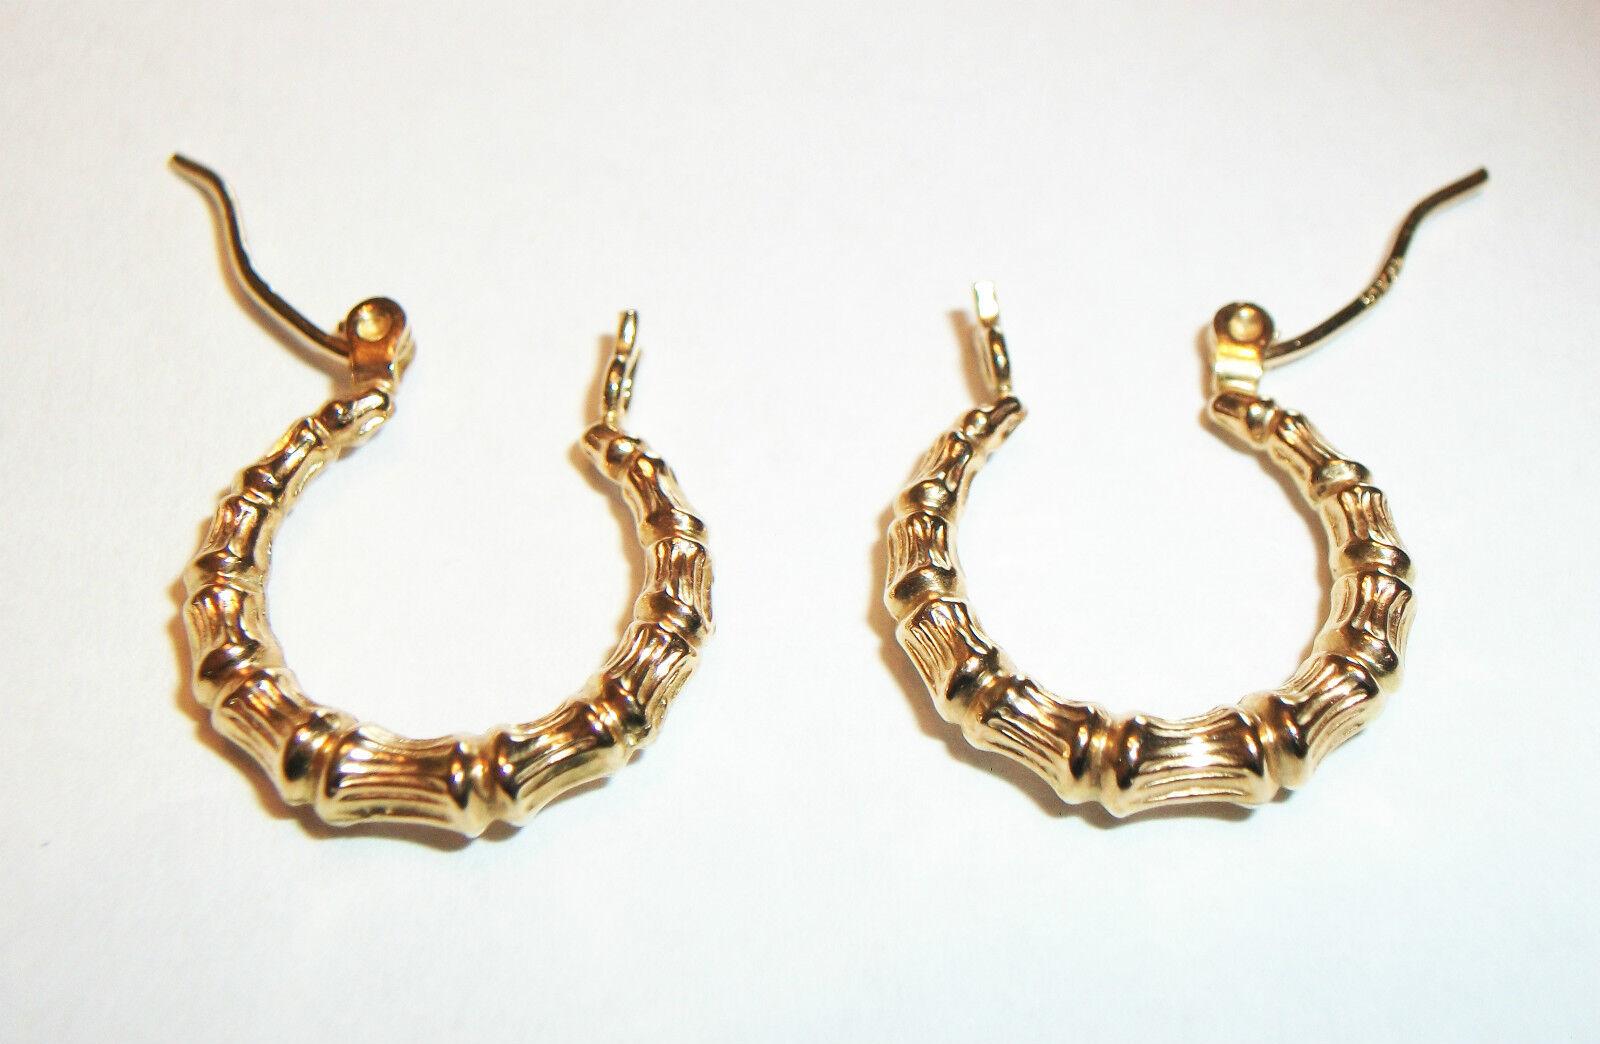 Modern Vintage Faux Bamboo Earrings, 10k Yellow Gold, Signed, Late 20th Century